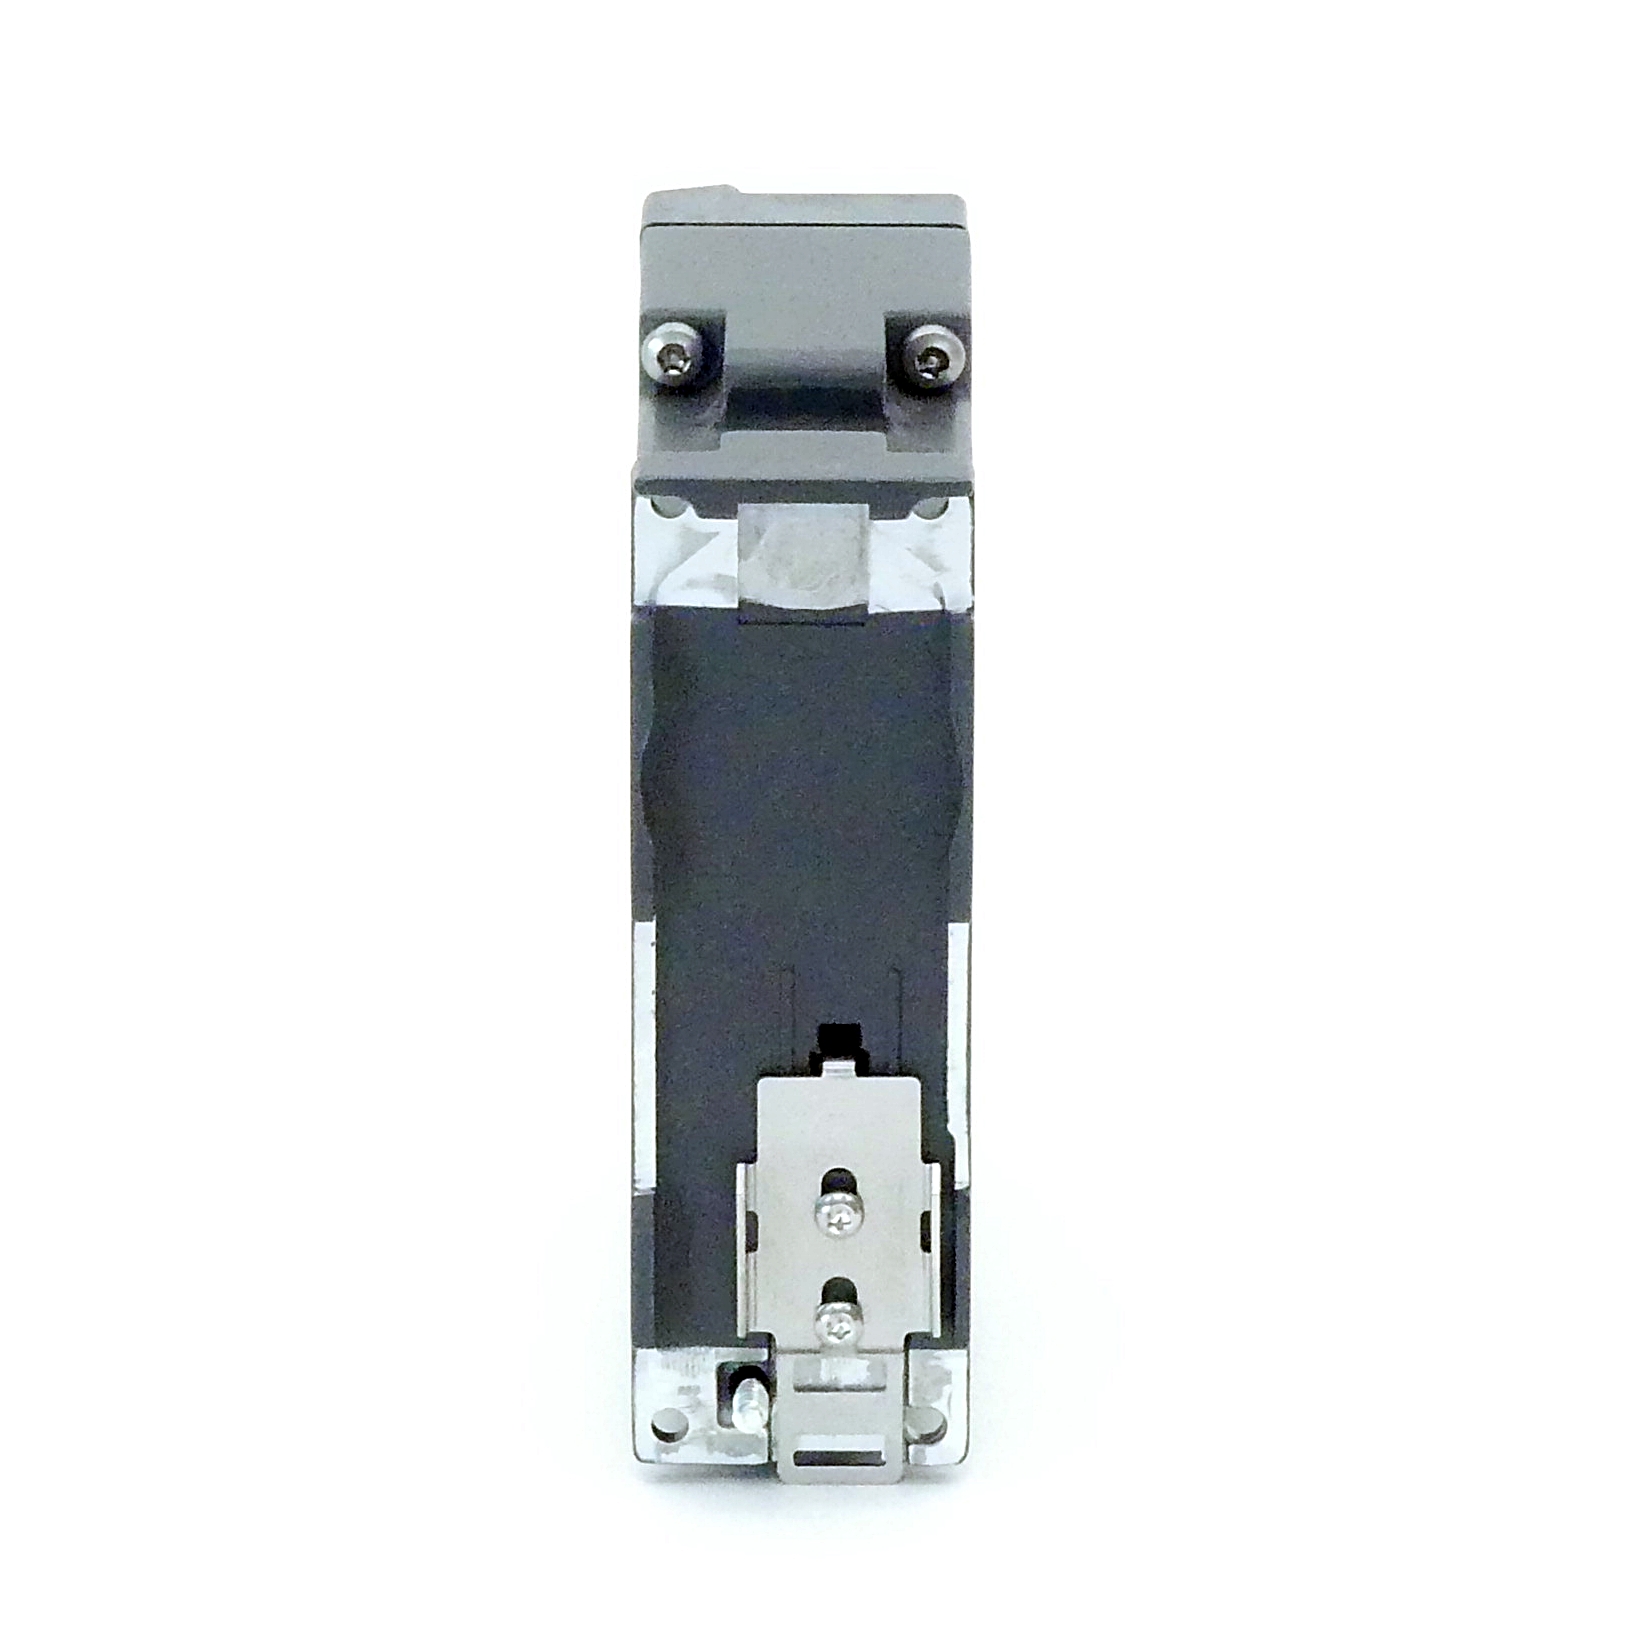 SCALANCE X005 Electrical switch module 